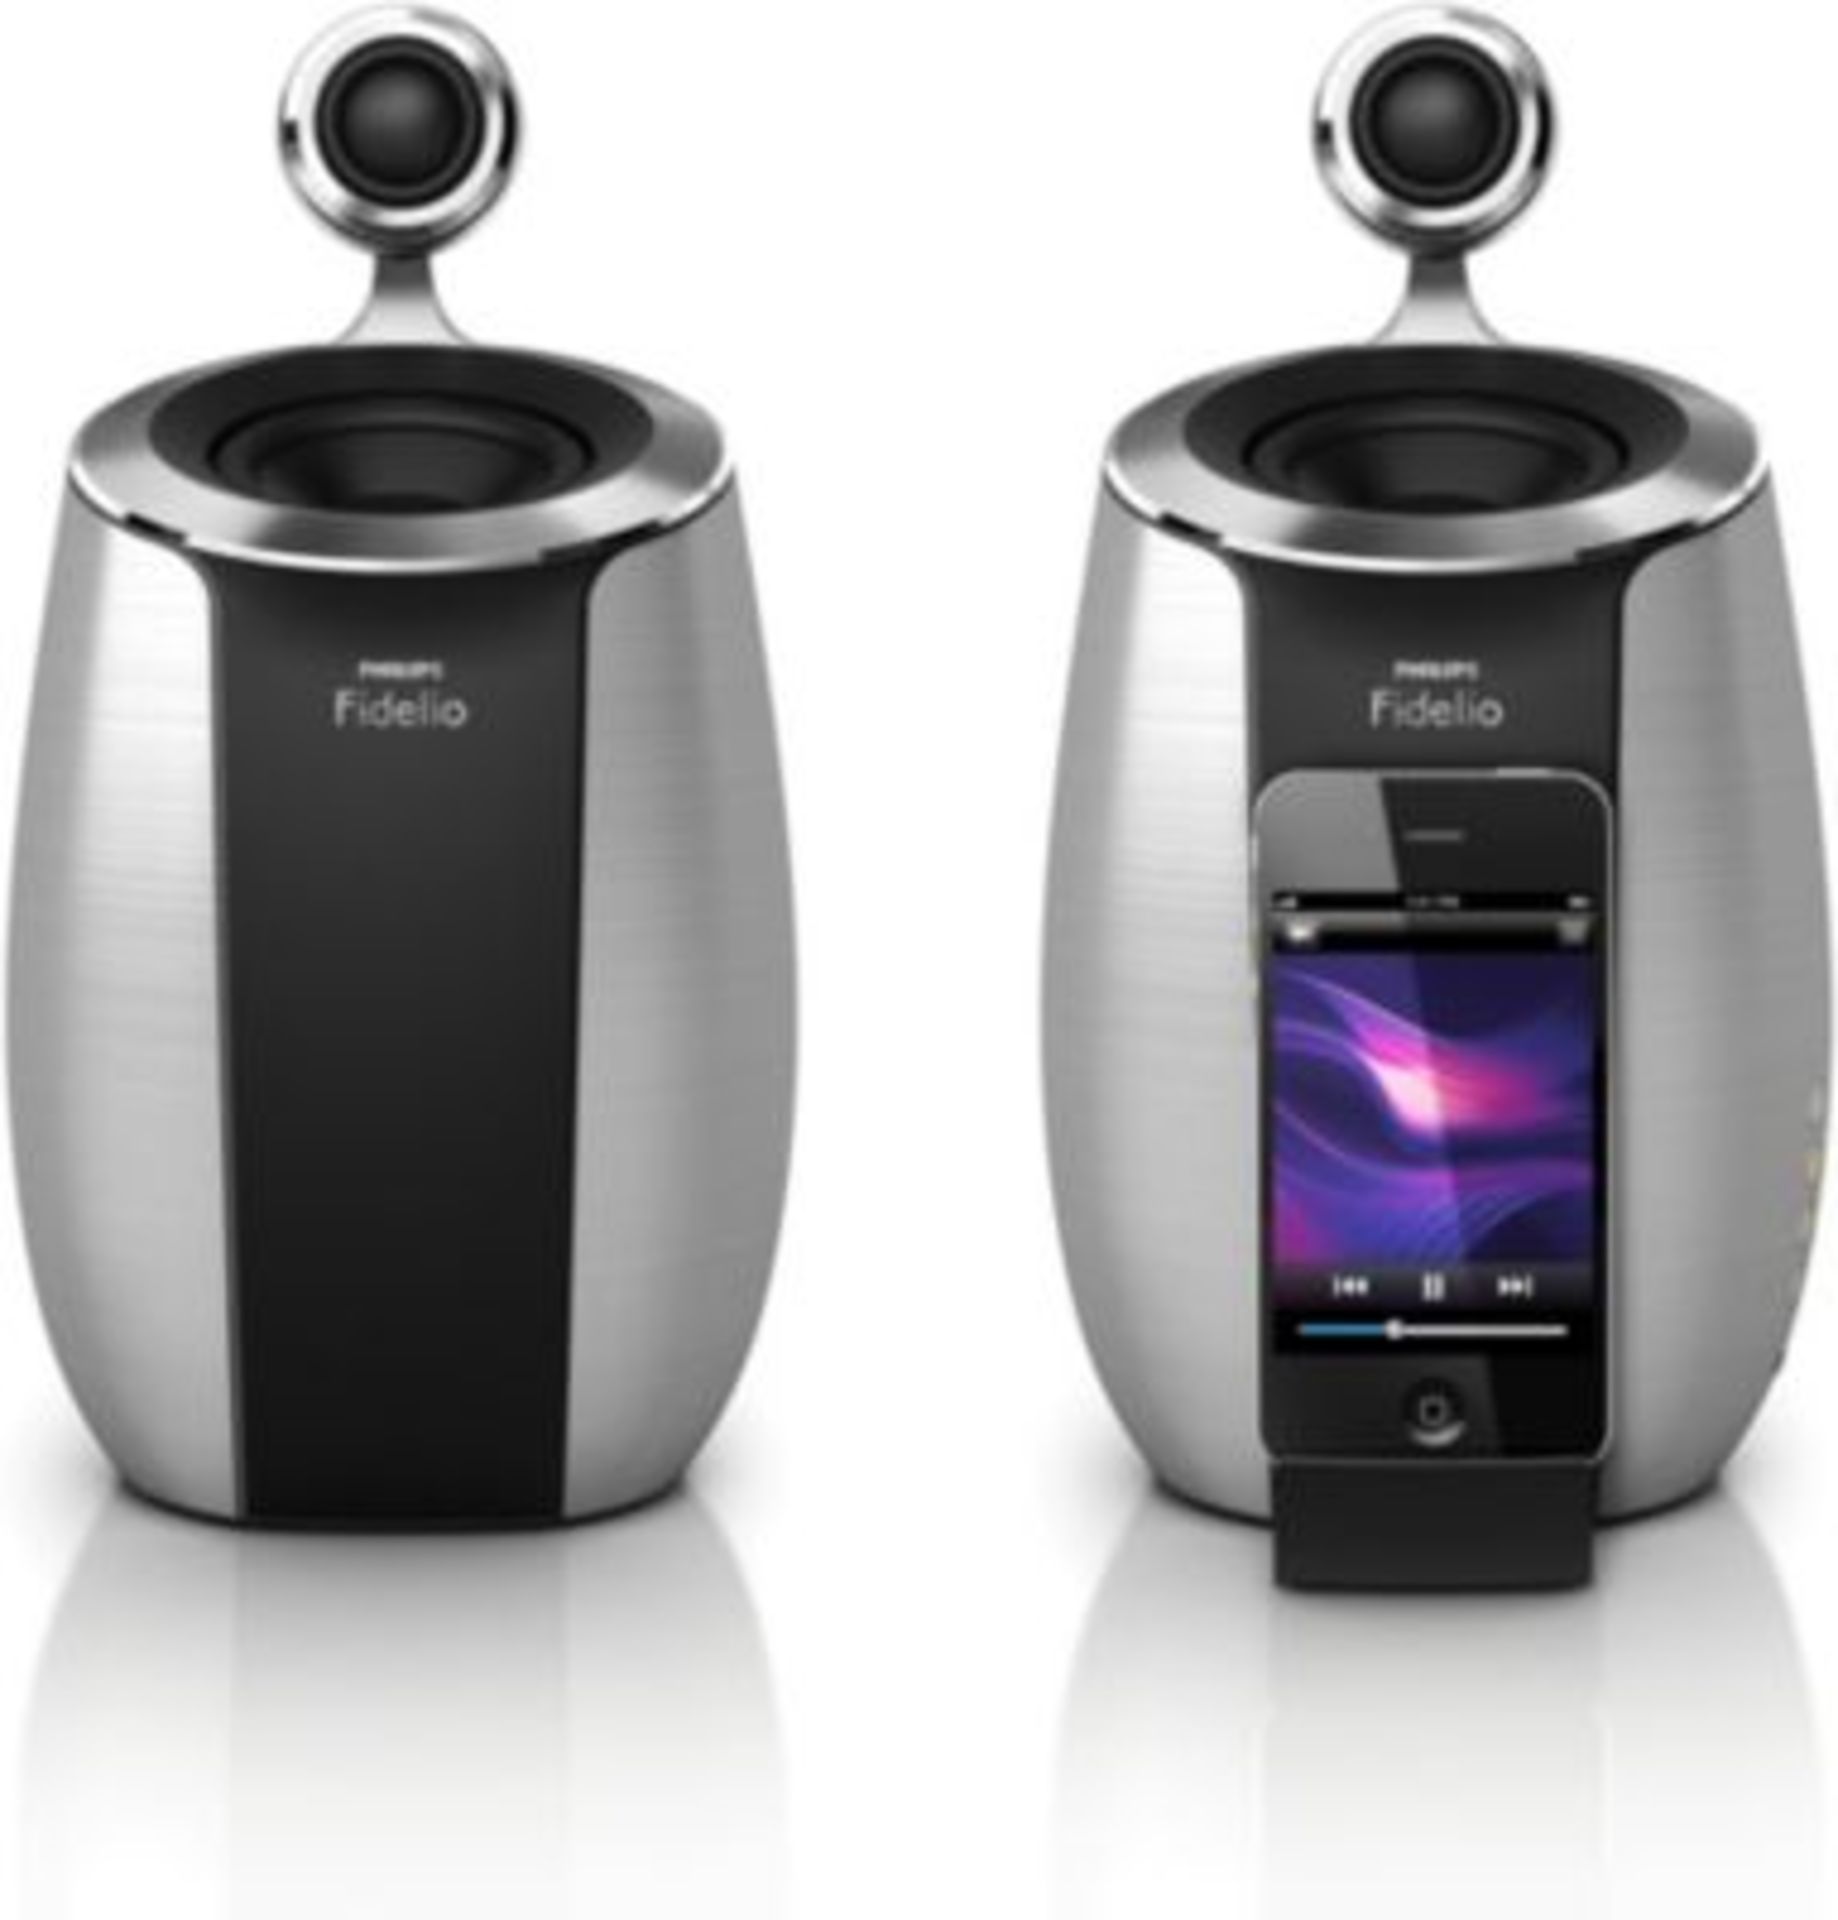 V Brand New Philips DS6600/00 Fidelio Docking Speaker - Ipod/Iphone Compatible - Aux Input - 2 x 25W